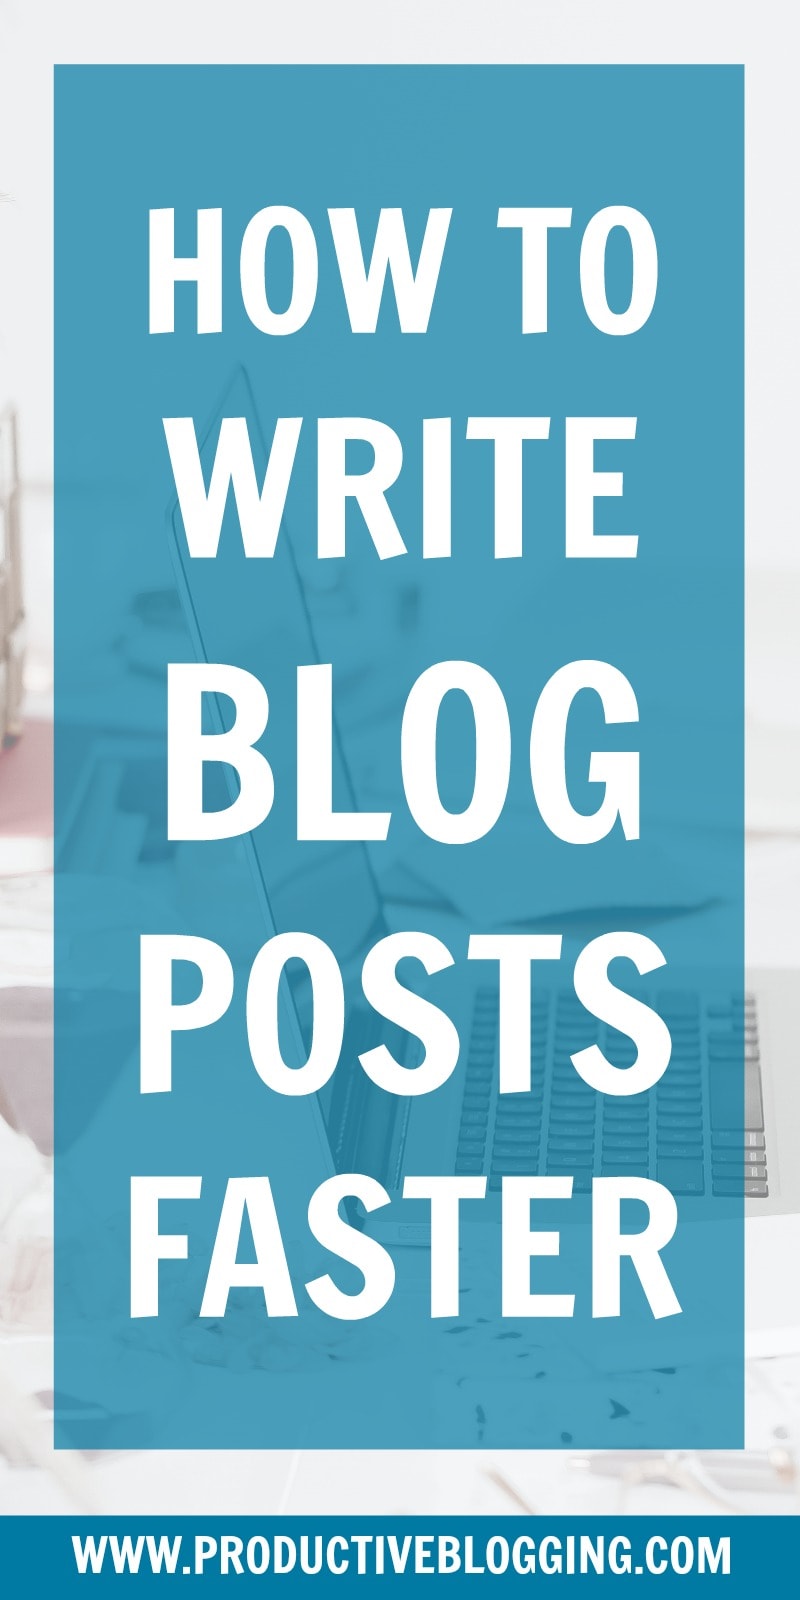 One of the most time-consuming parts of blogging is actually writing the blog posts! So being able to write blog posts more quickly can have a HUGE difference impact on your productivity. Here’s how to write blog posts faster… #blogwriting #blogpostwriting #writefaster #blogfaster #workfaster #blogcontent #writeblog #bloggers #blogging #blogtips #bloggingtips #blogsmarternotharder #worksmarternotharder #productivity #productivitytips #productivityhacks #productiveblogging